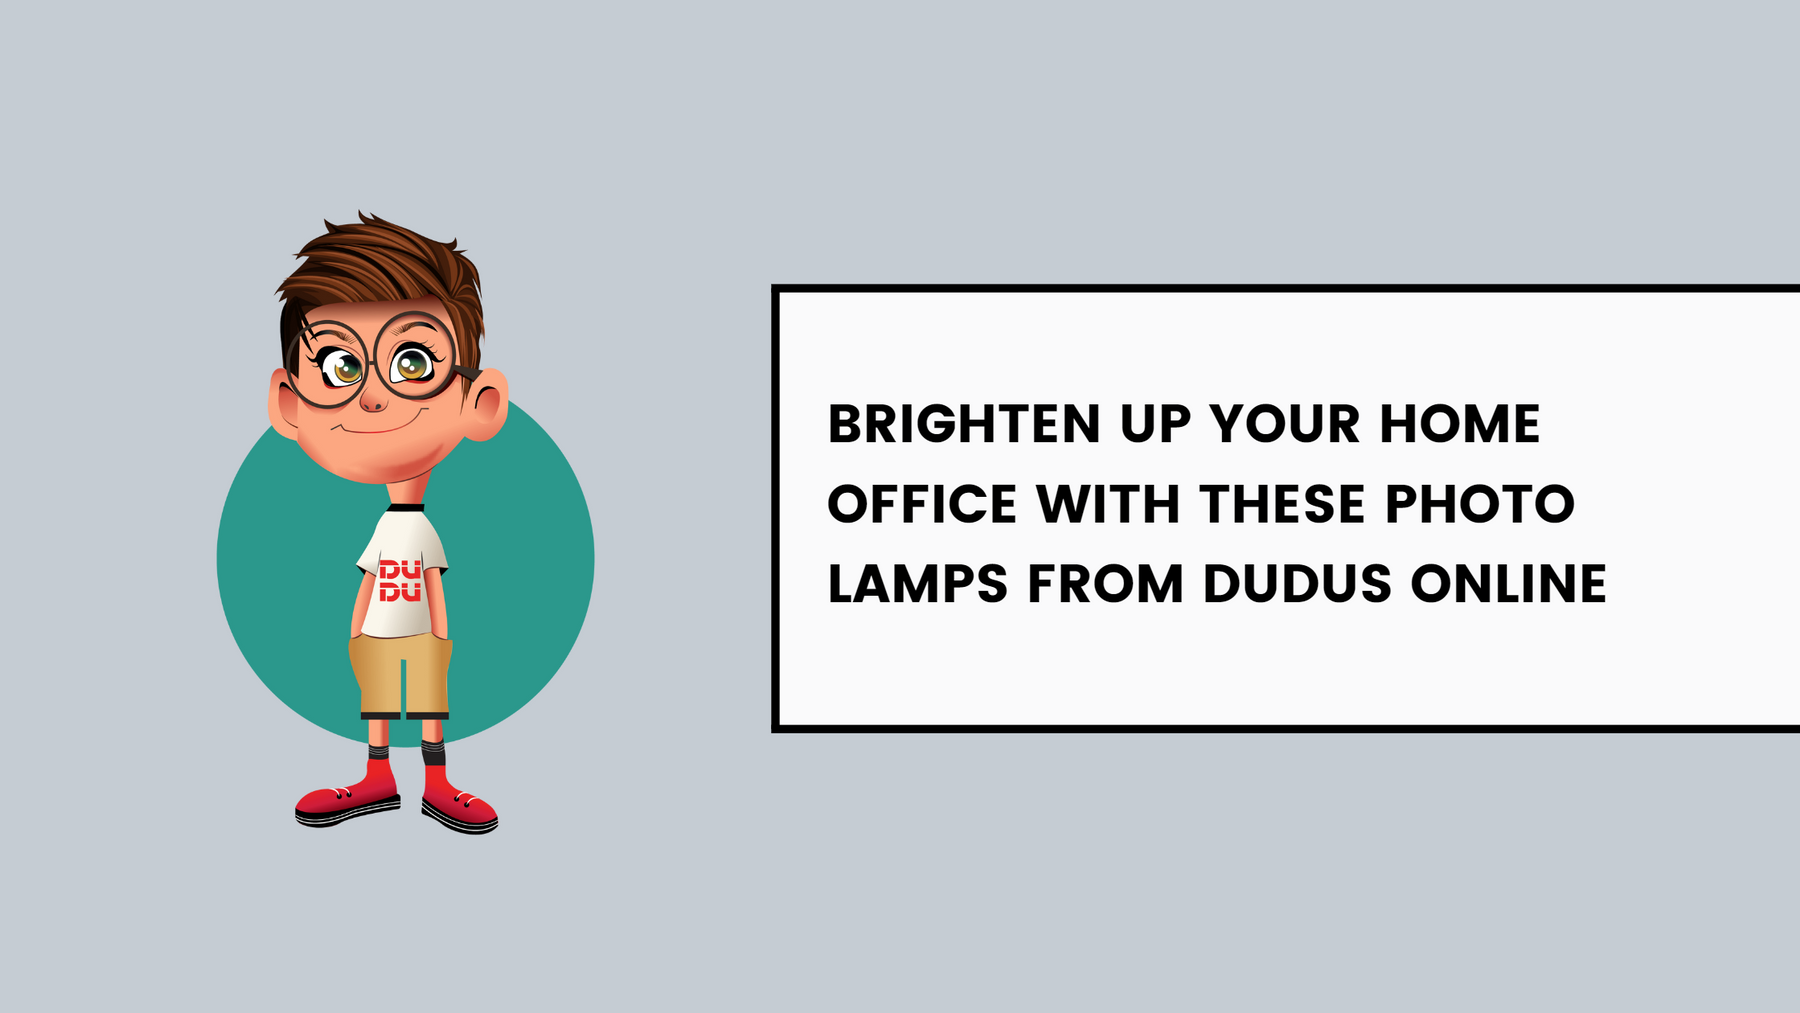 Brighten Up Your Home Office With These Photo Lamps From Dudus Online